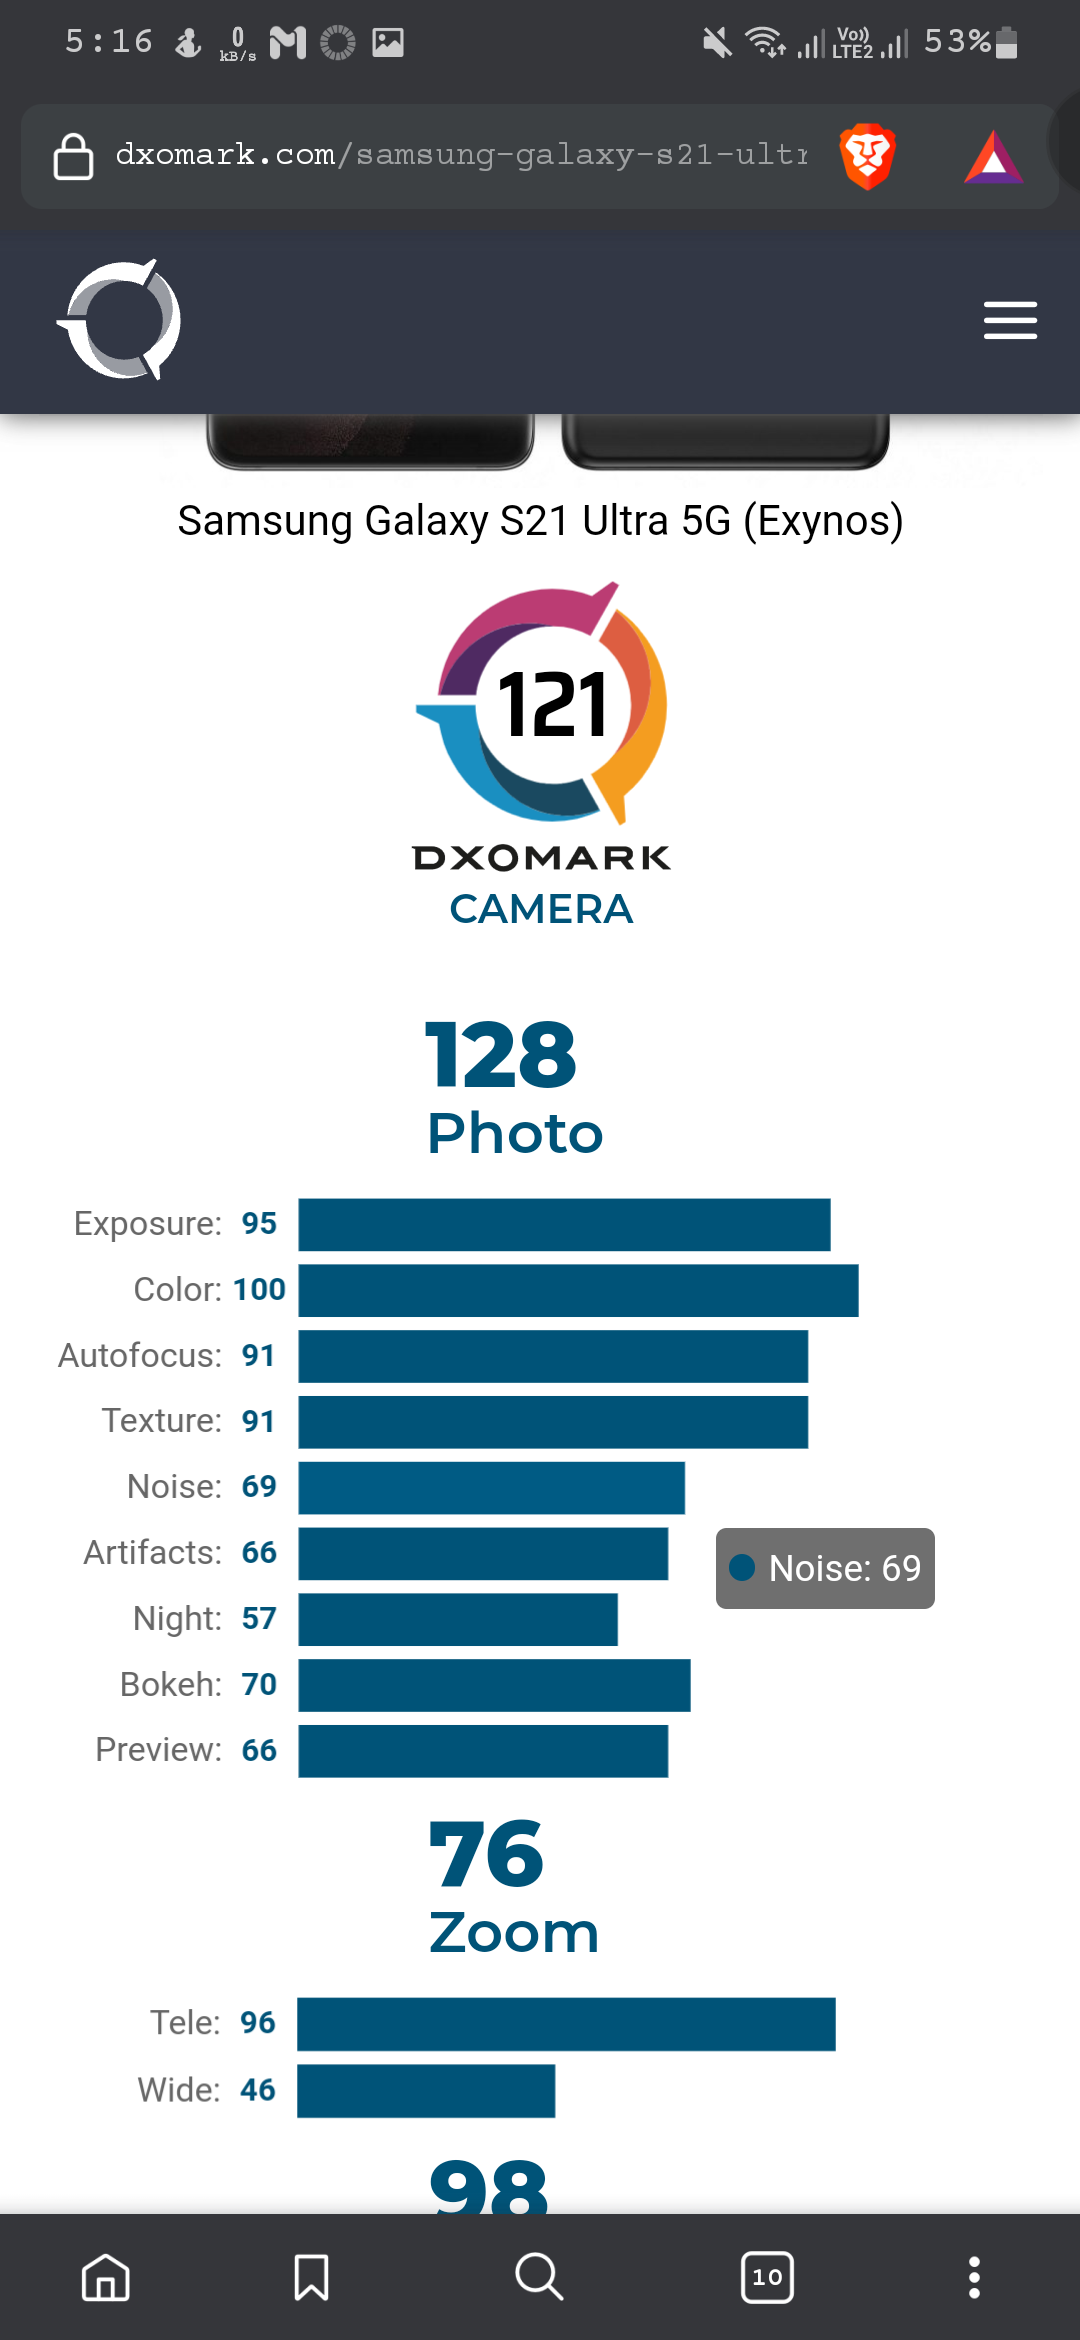 Disappointing Dxomark camera score of S21 Ultra - Samsung Members